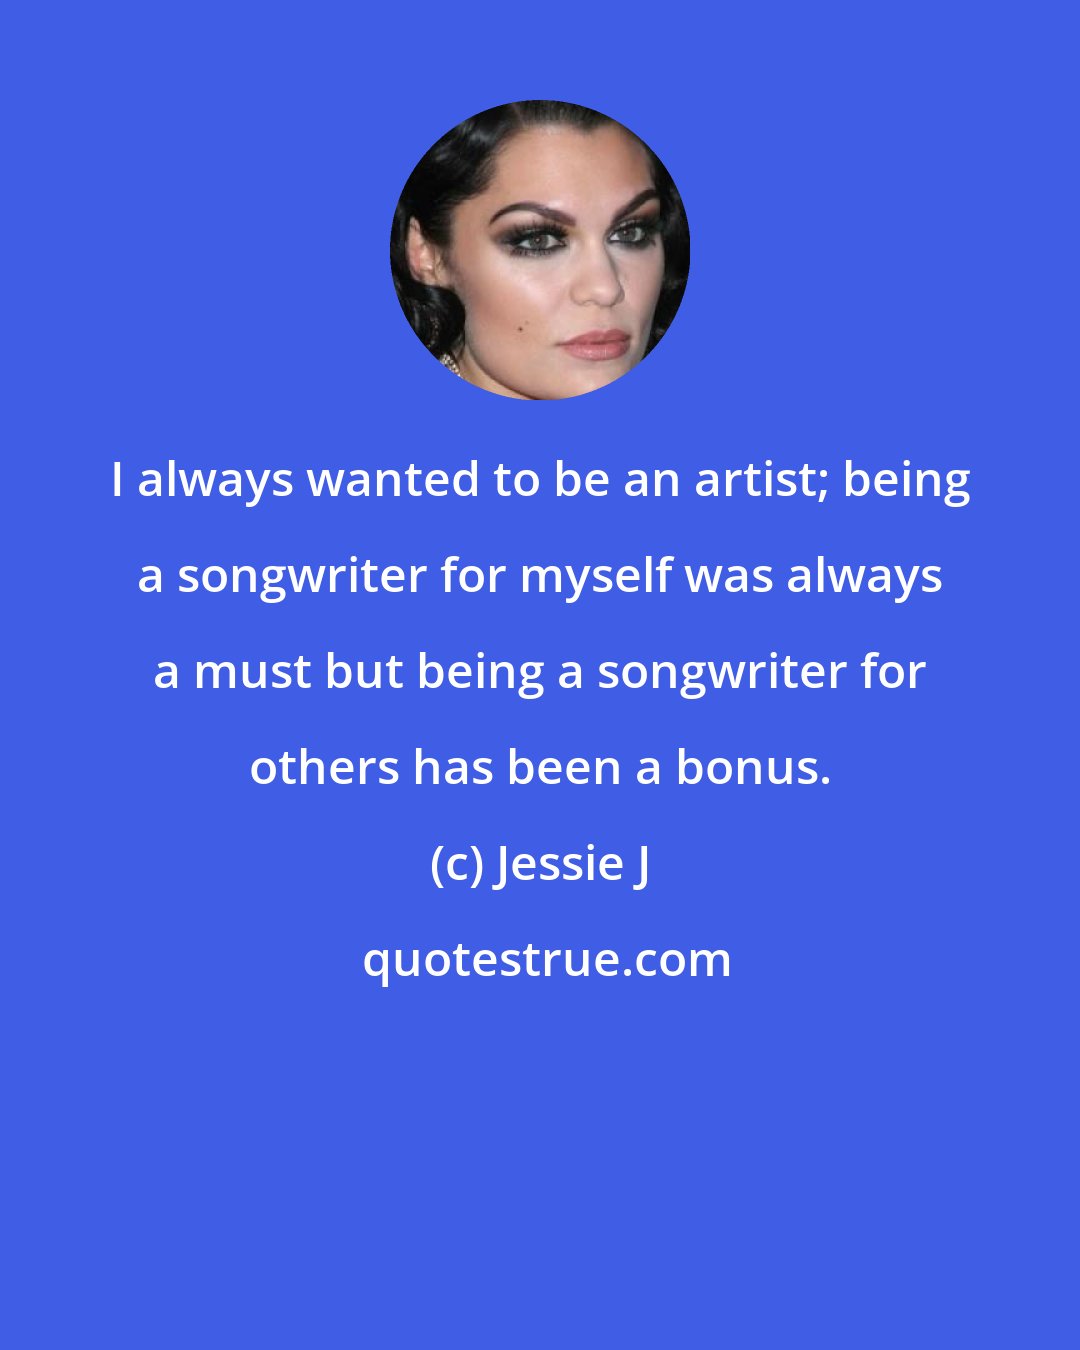 Jessie J: I always wanted to be an artist; being a songwriter for myself was always a must but being a songwriter for others has been a bonus.